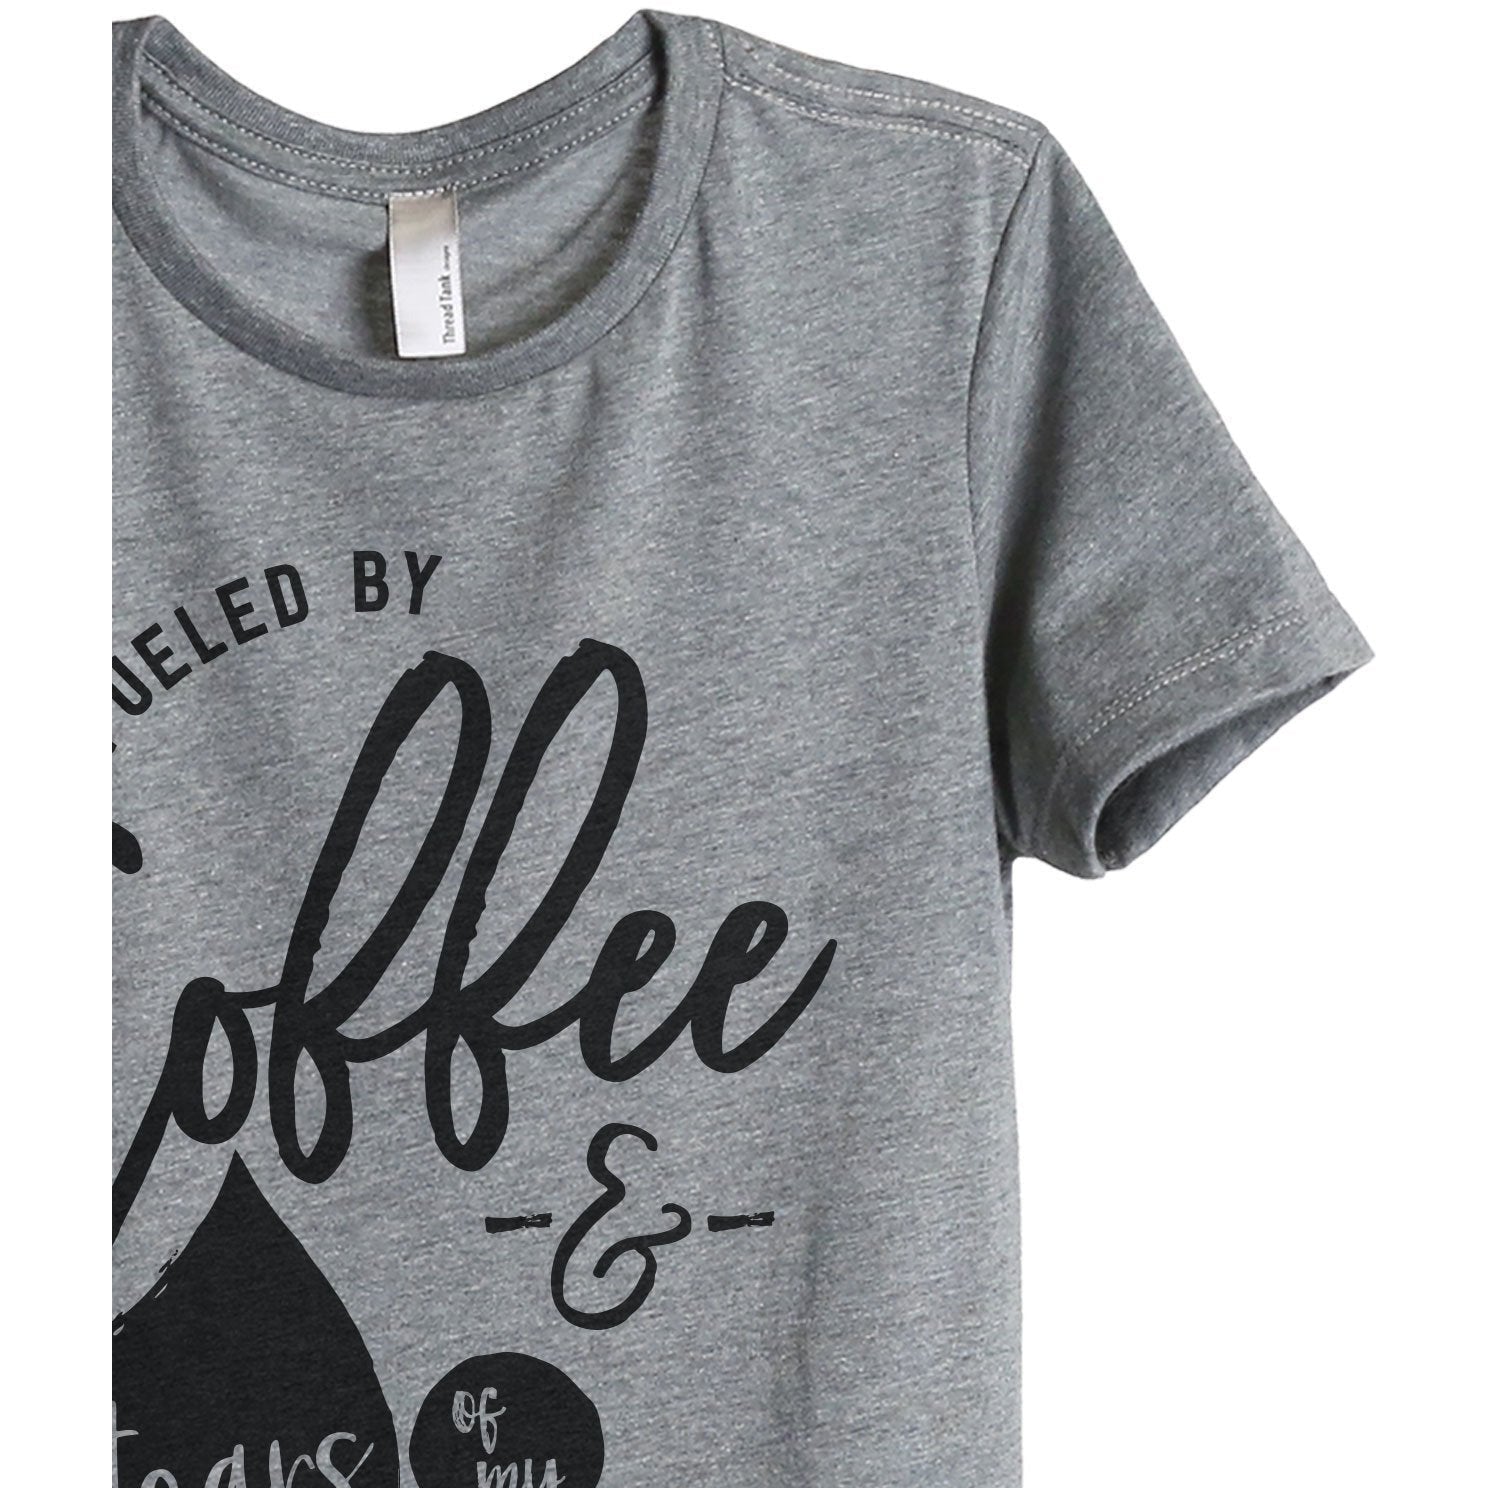 Fueled By Coffee And Tears Of My Enemies Women's Relaxed Crewneck T-Shirt Top Tee Heather Grey Zoom Details
